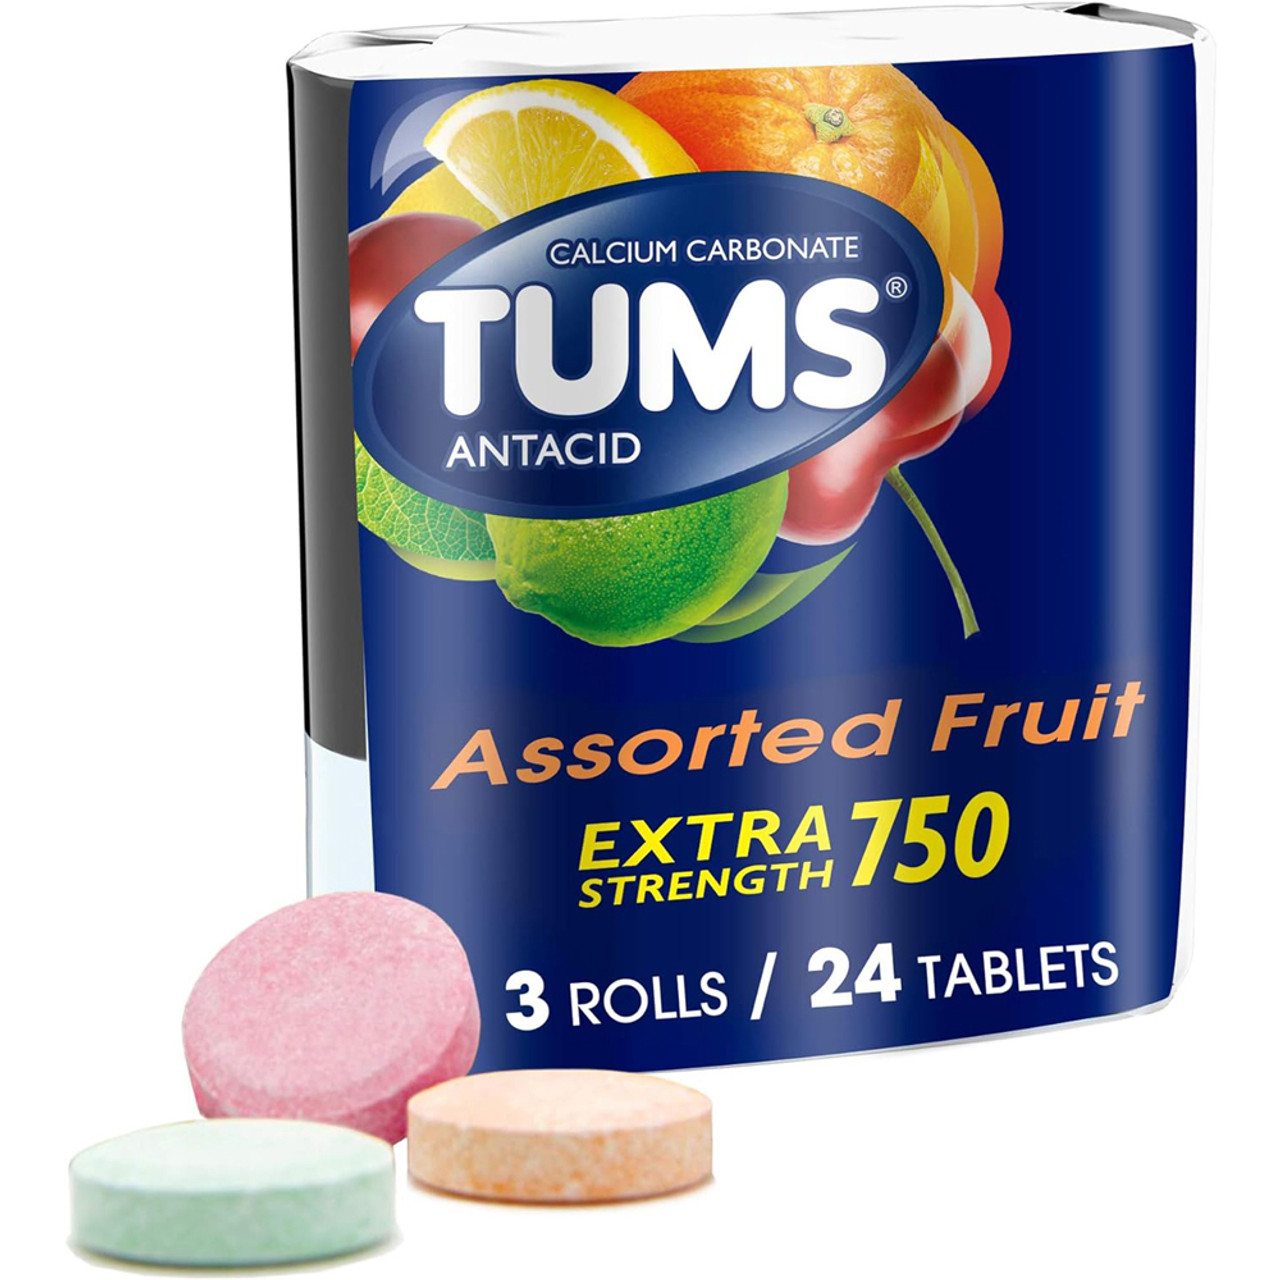 can i give my pregnant dog tums for calcium